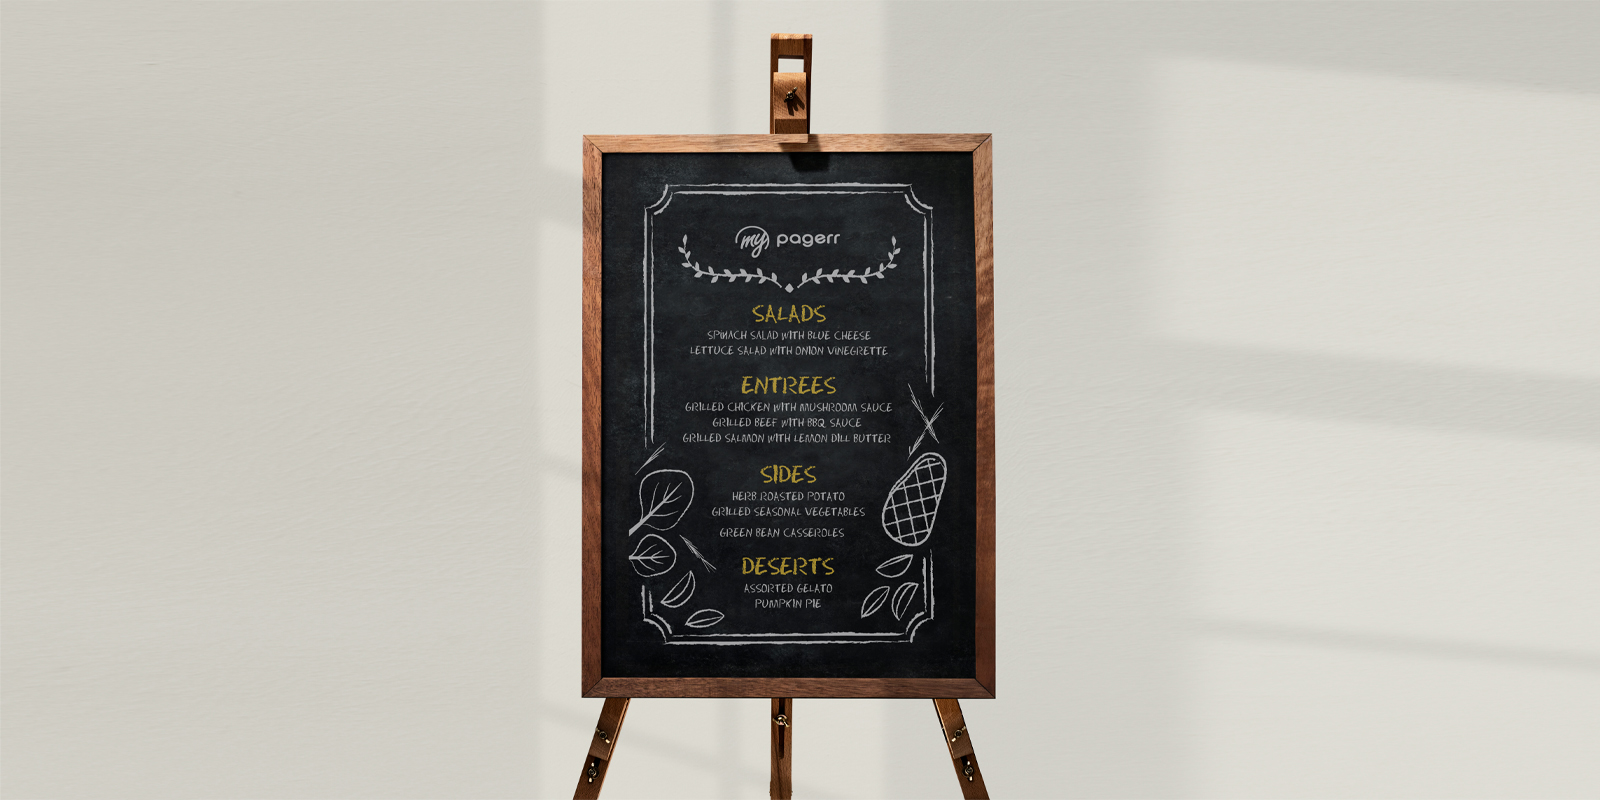 Chalkboard signs in Hamburg - Print with Pagerr